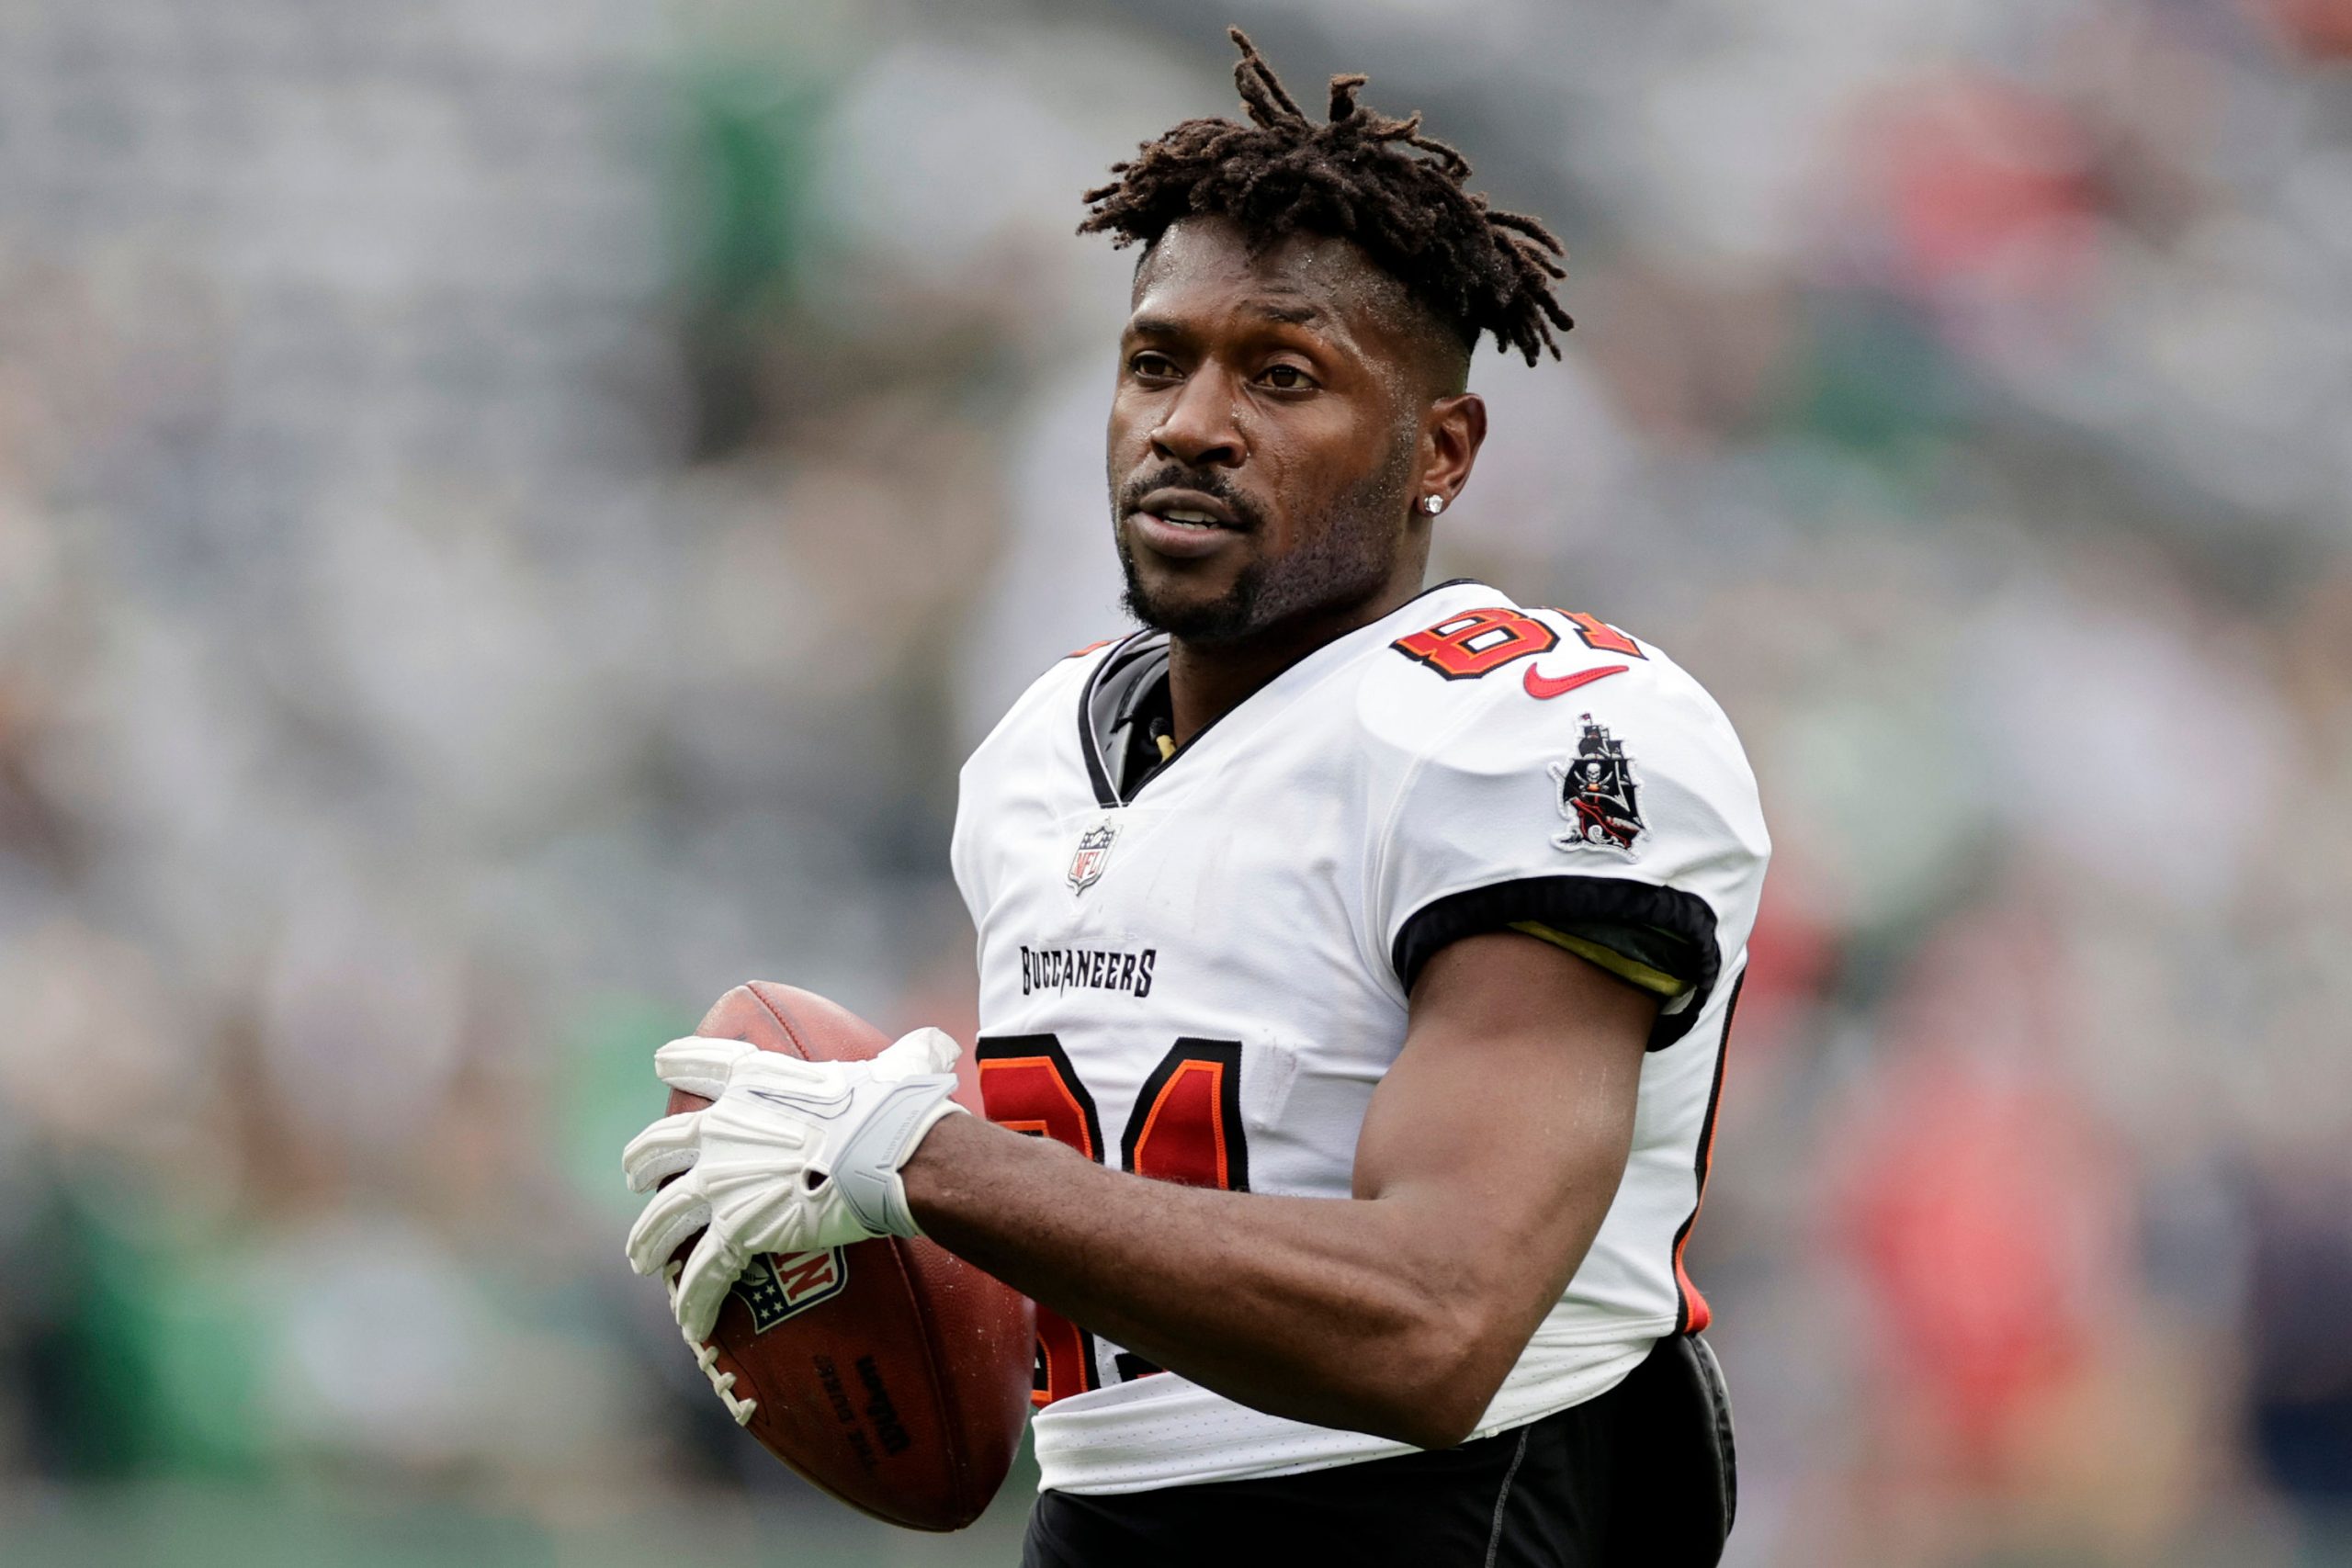 Antonio Brown’s Snapchat suspended after ex-NFL star posted Chelsie Kyriss’ sexually explicit photo